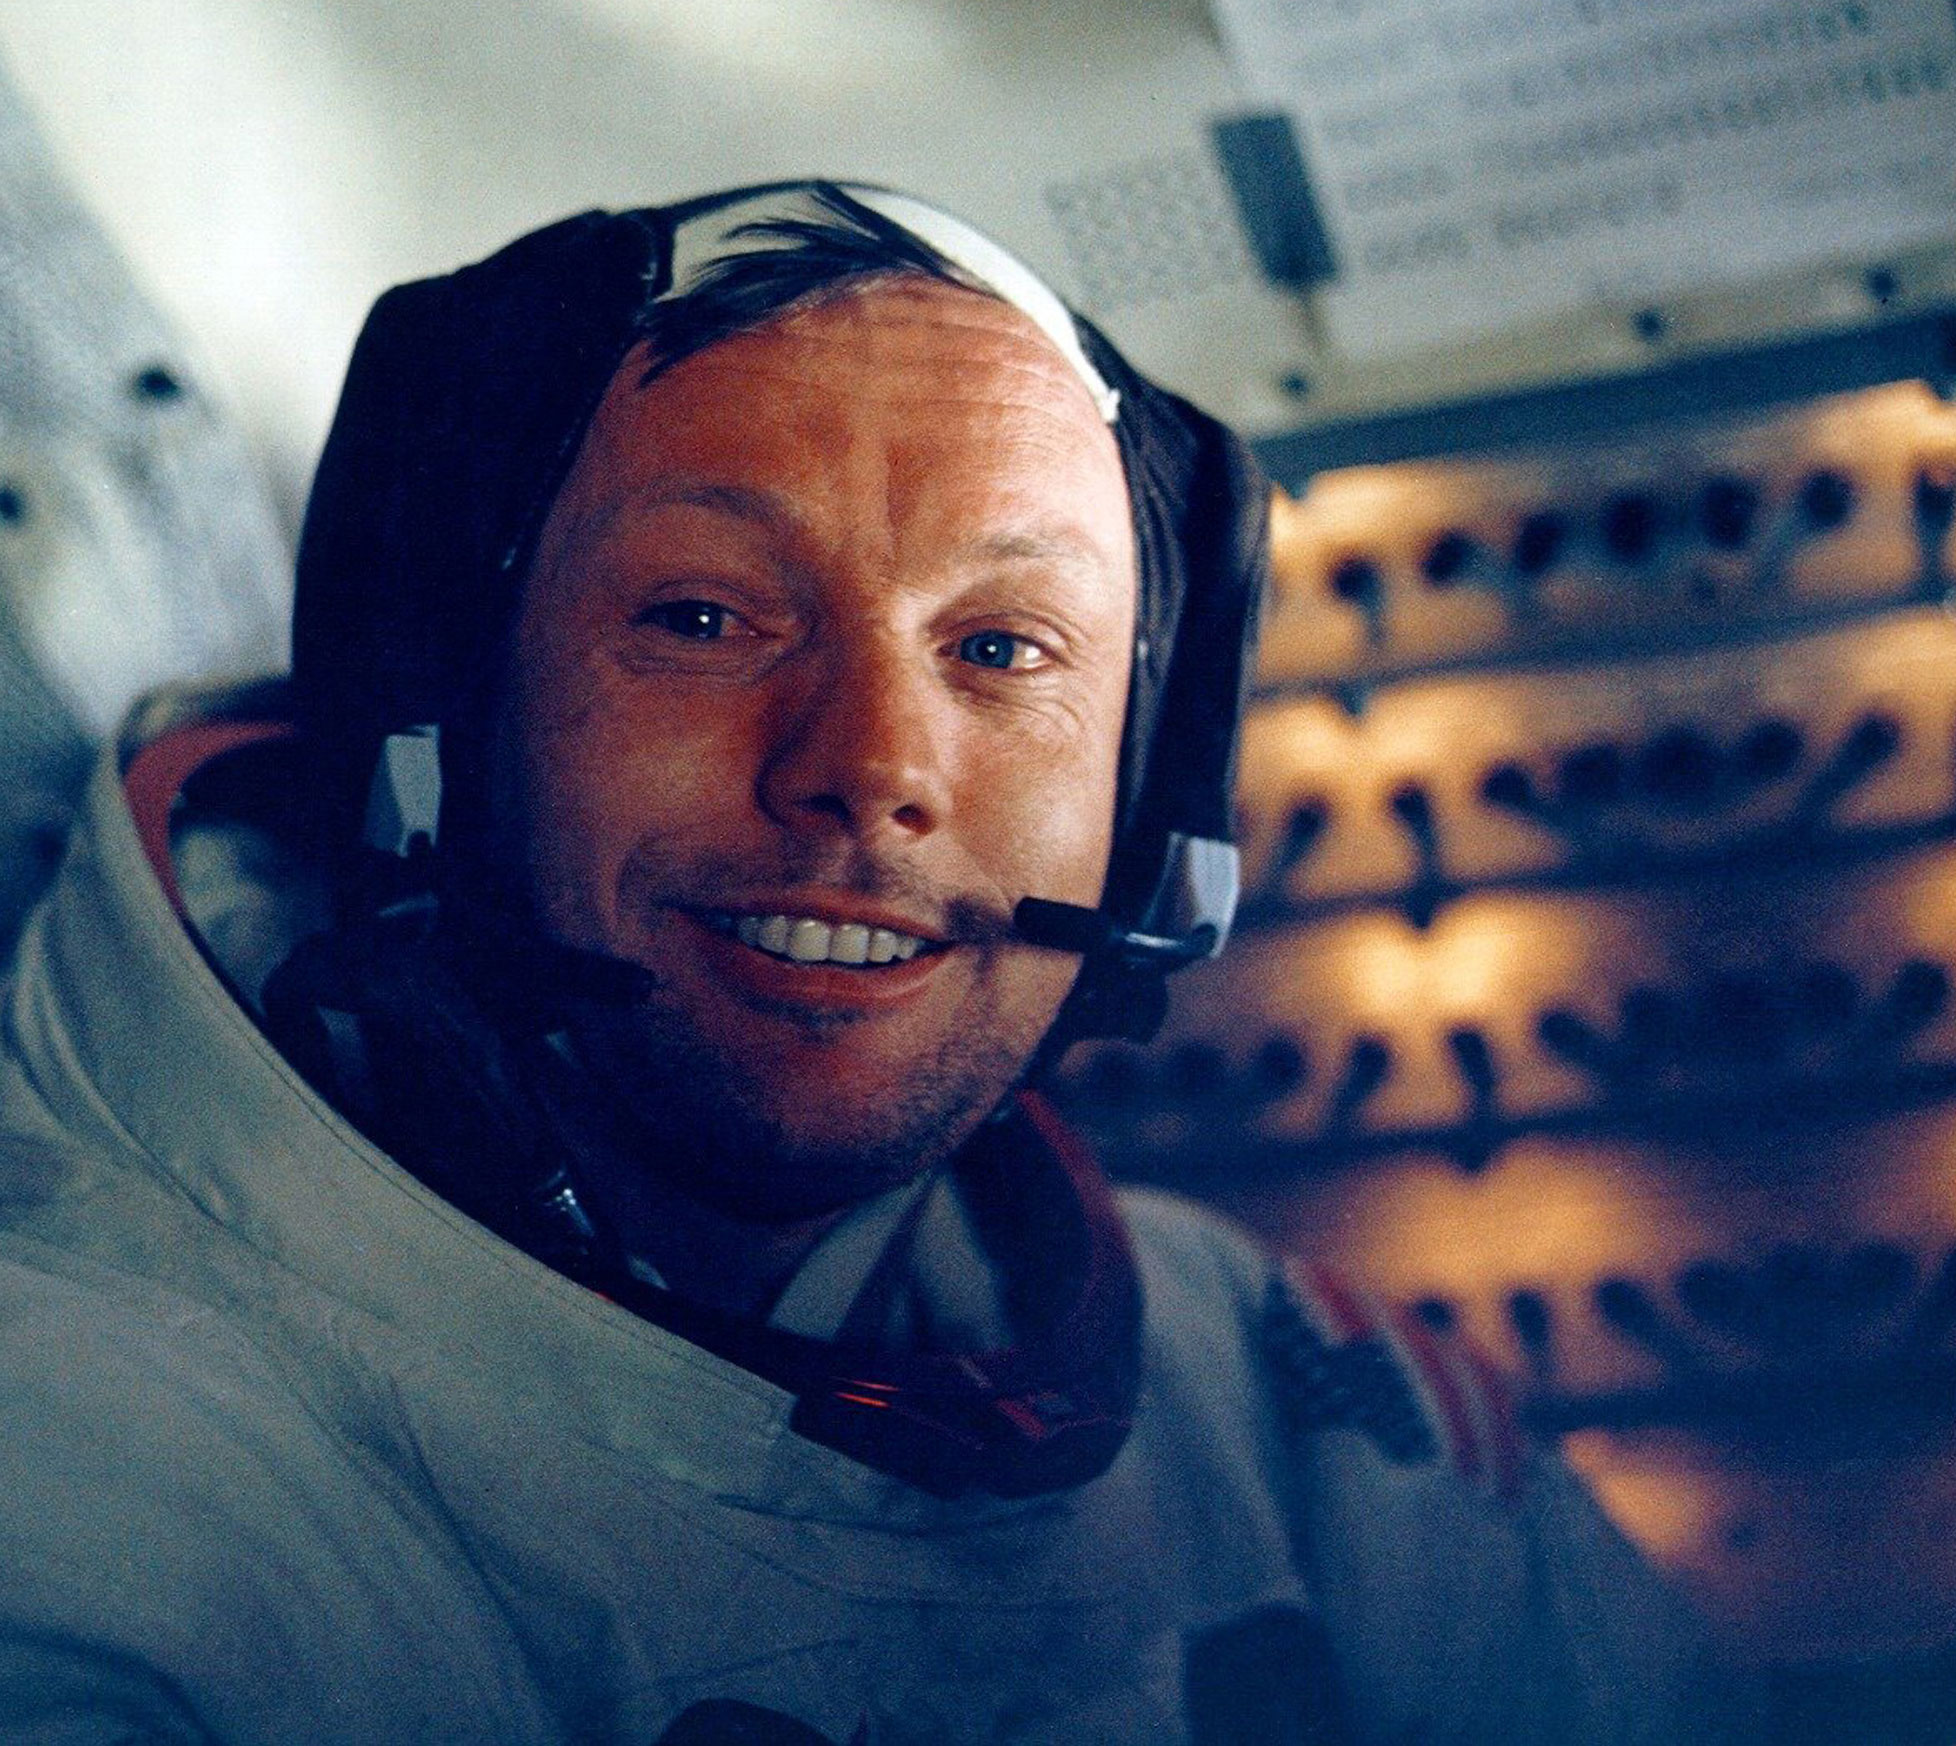 Neil Alden Armstrong inside the Lunar Module on the surface of the Moon, 20 July 1969. (NASA)